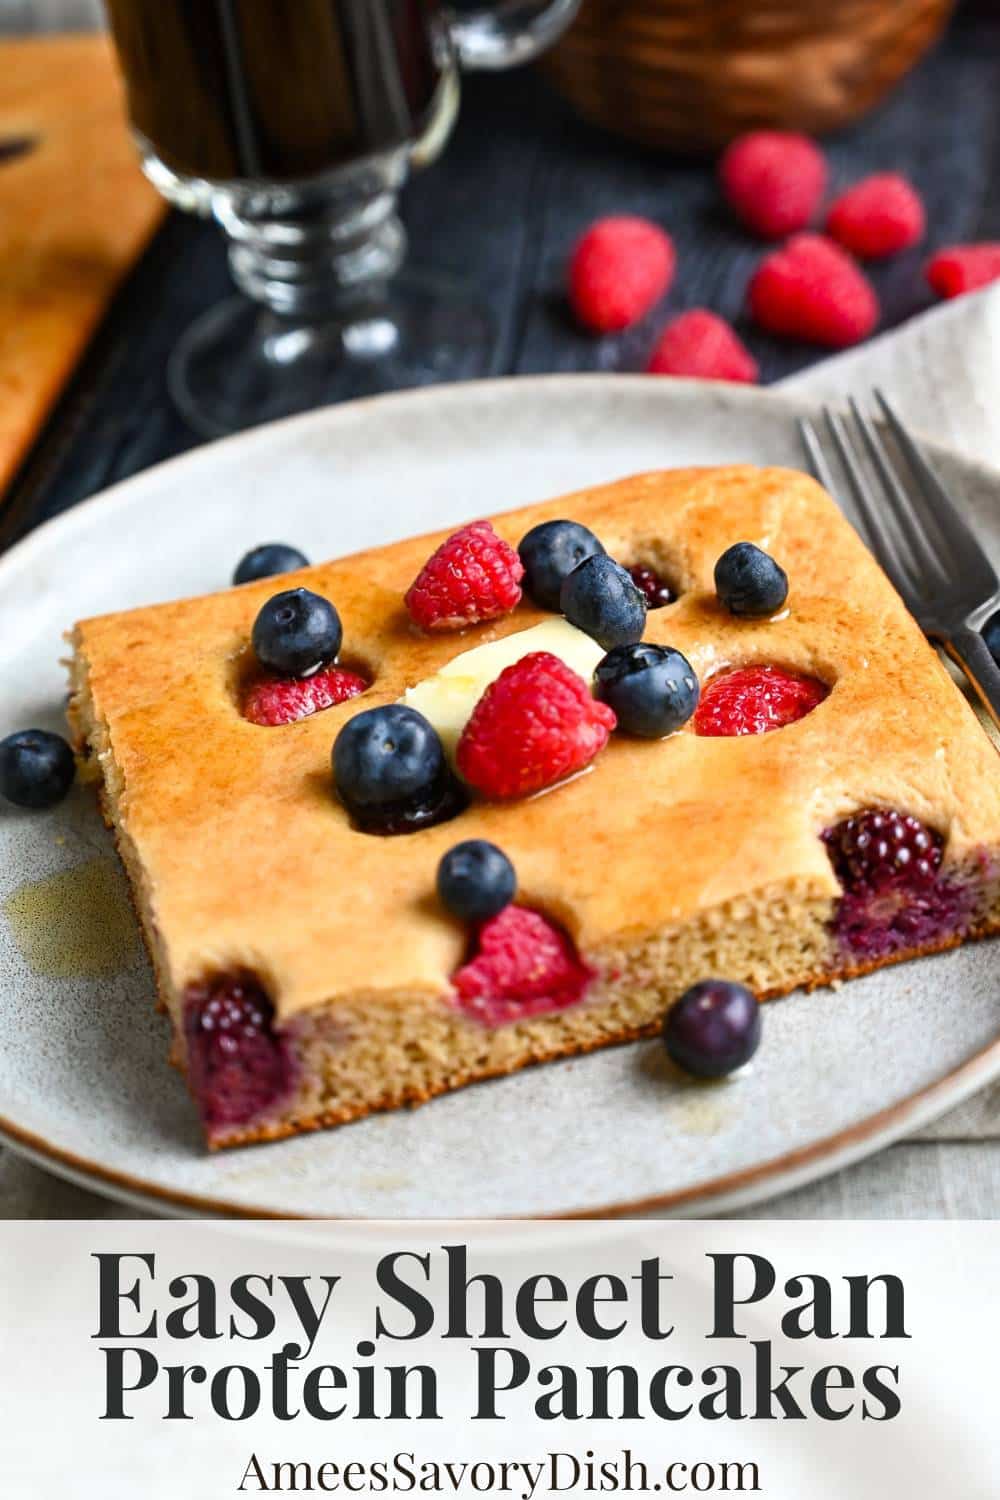 This Sheet Pan Pancakes Recipe offers a convenient method for fluffy delicious high-protein pancakes in under 20 minutes! Gluten-free option included. via @Ameessavorydish